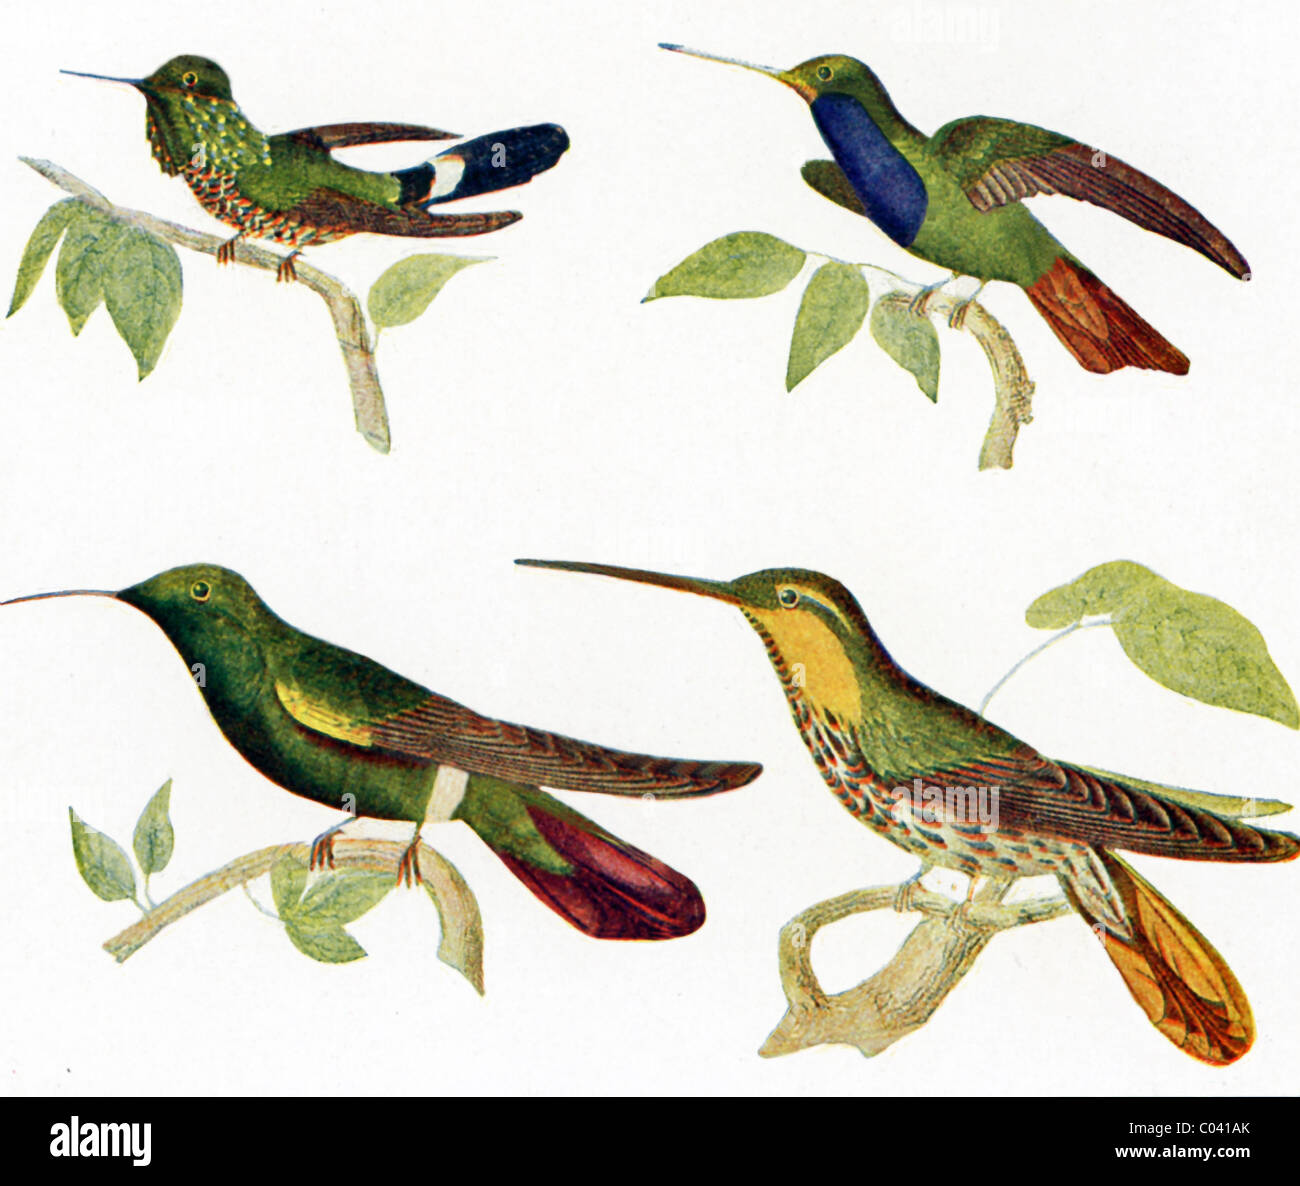 These hummingbirds belong to the family known as Trochilidae. They have brilliant colored plumage. Stock Photo